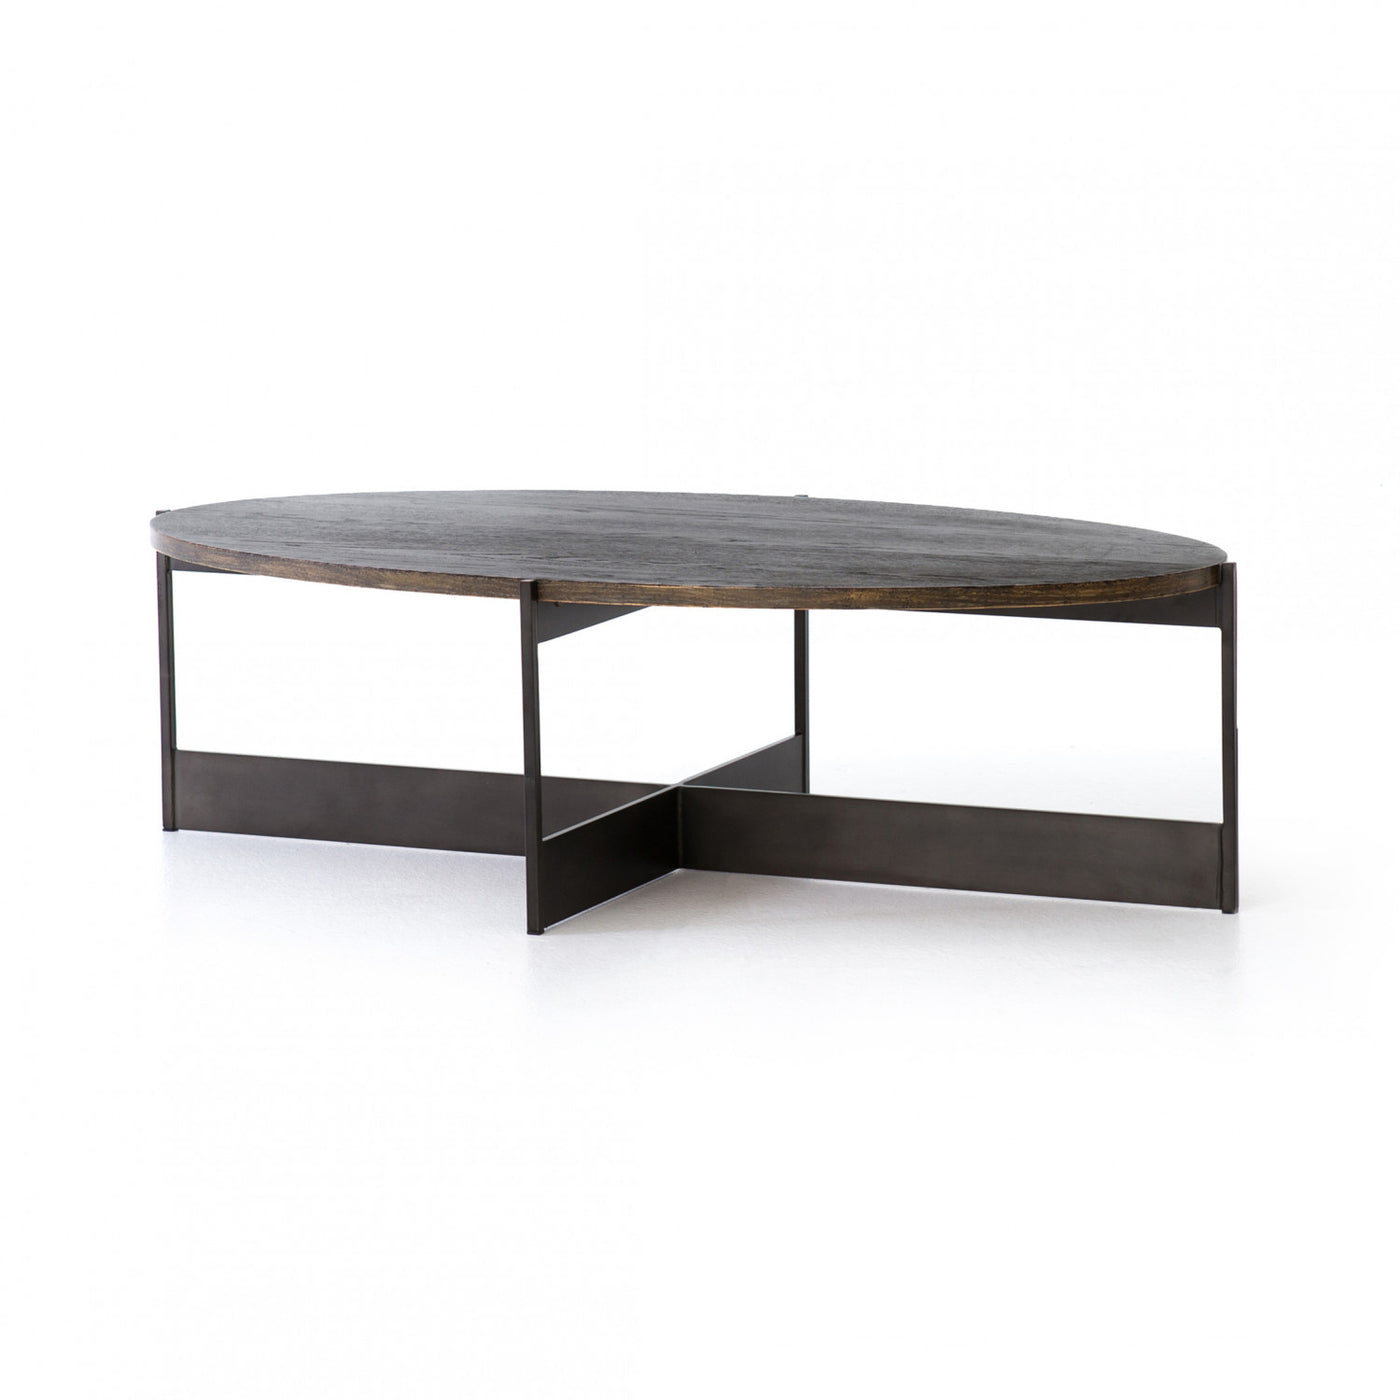 SHANNON OVAL COFFEE TABLE